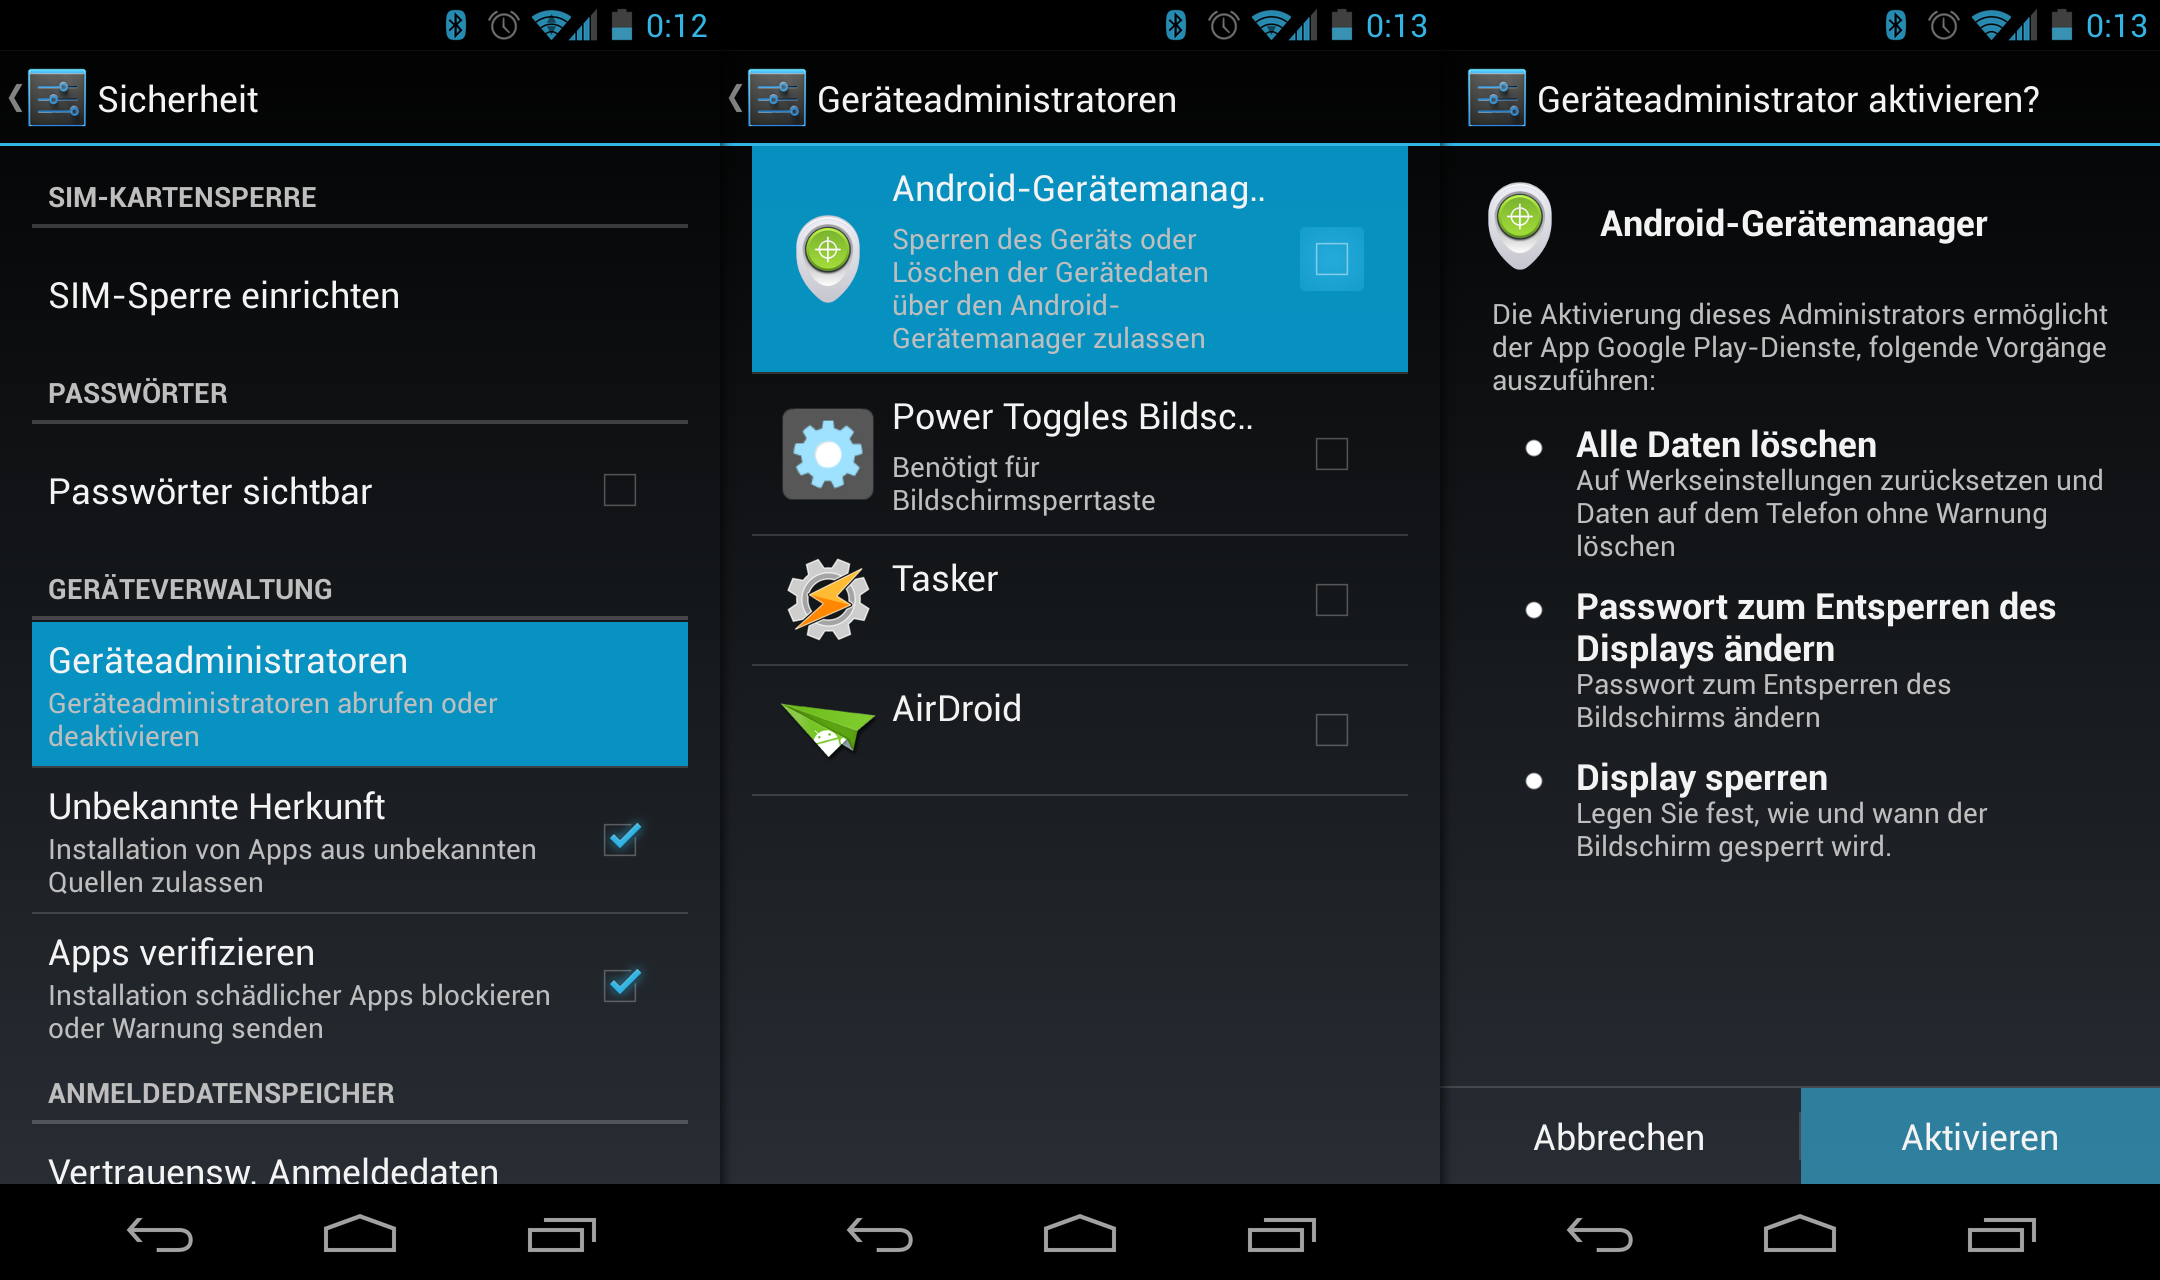 Android Gerätemanager